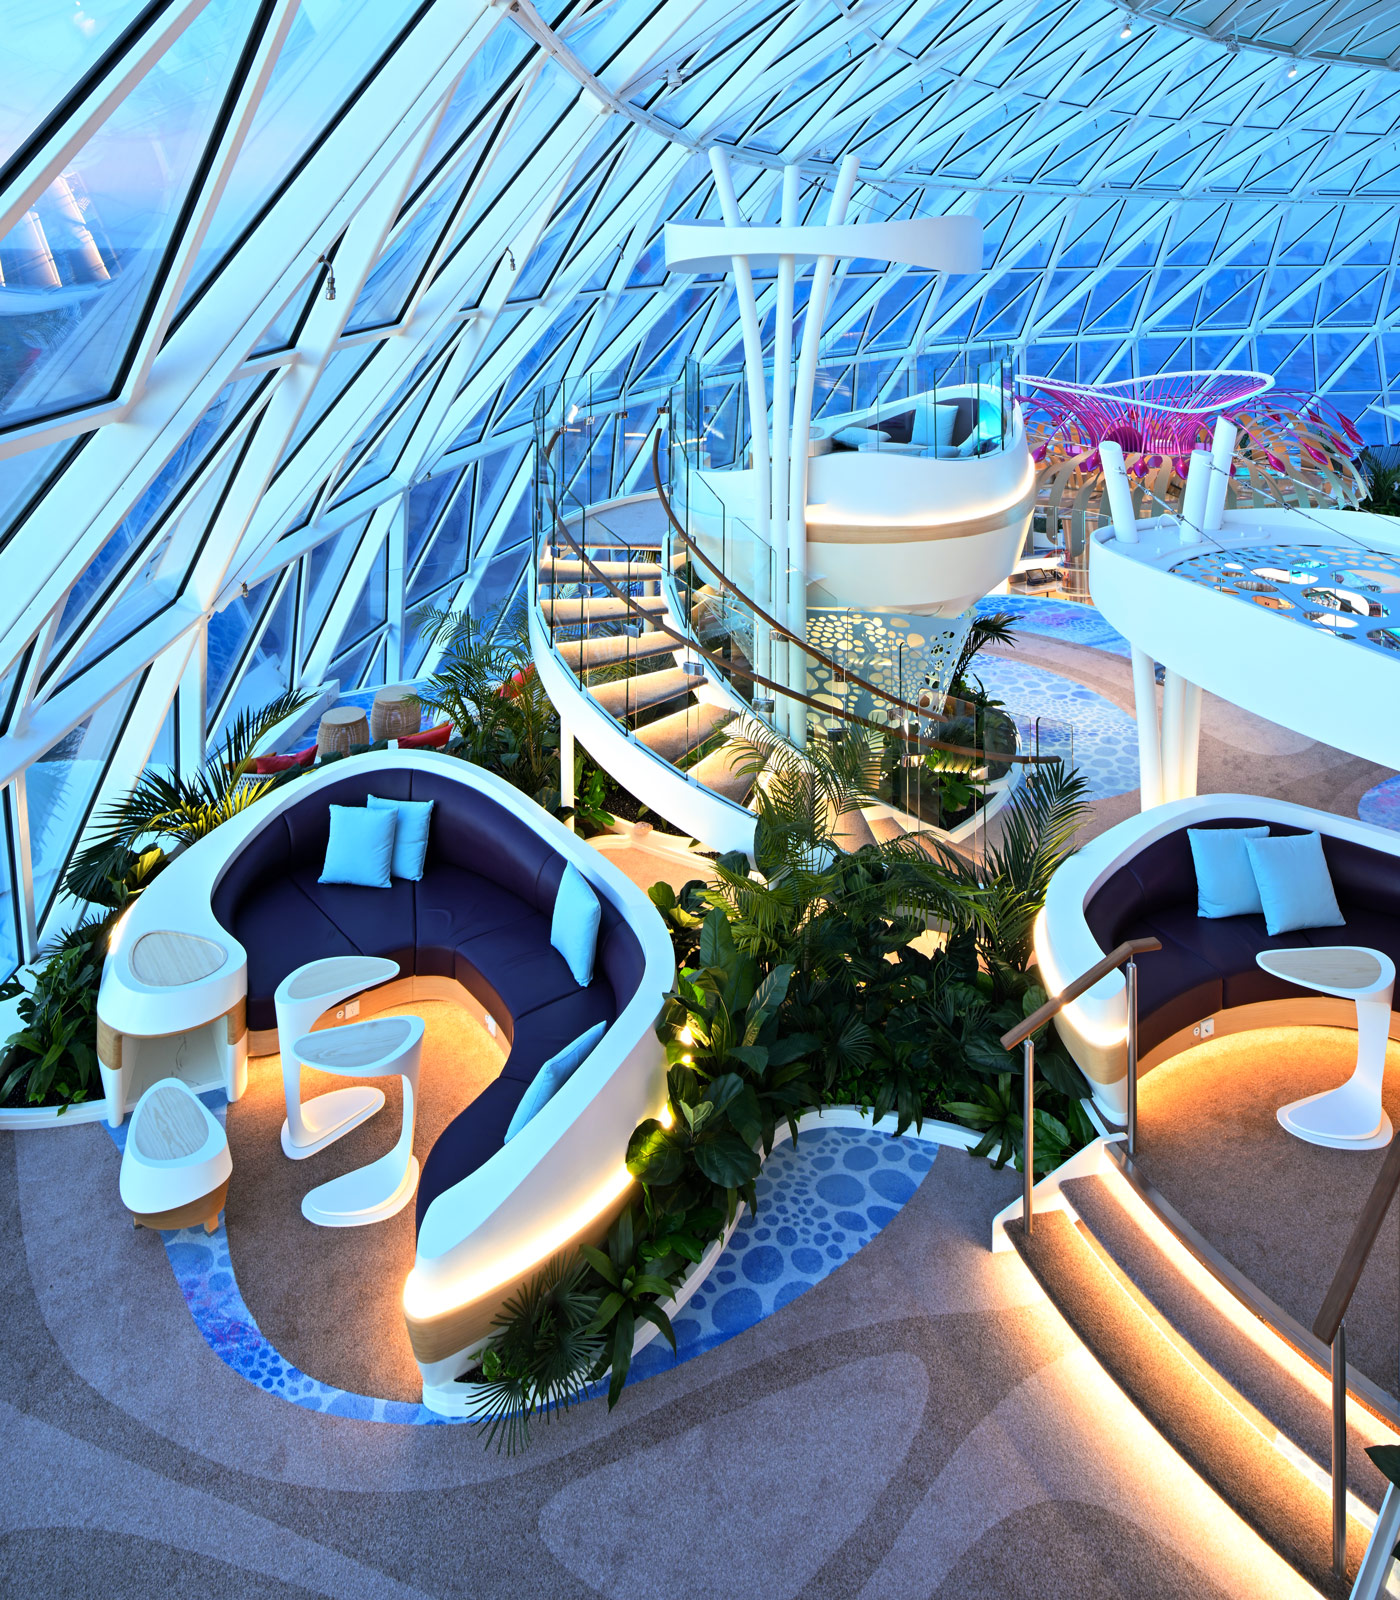 By day and night, guests can enjoy wraparound ocean views and The Overlook Pods - the first of their kind at sea